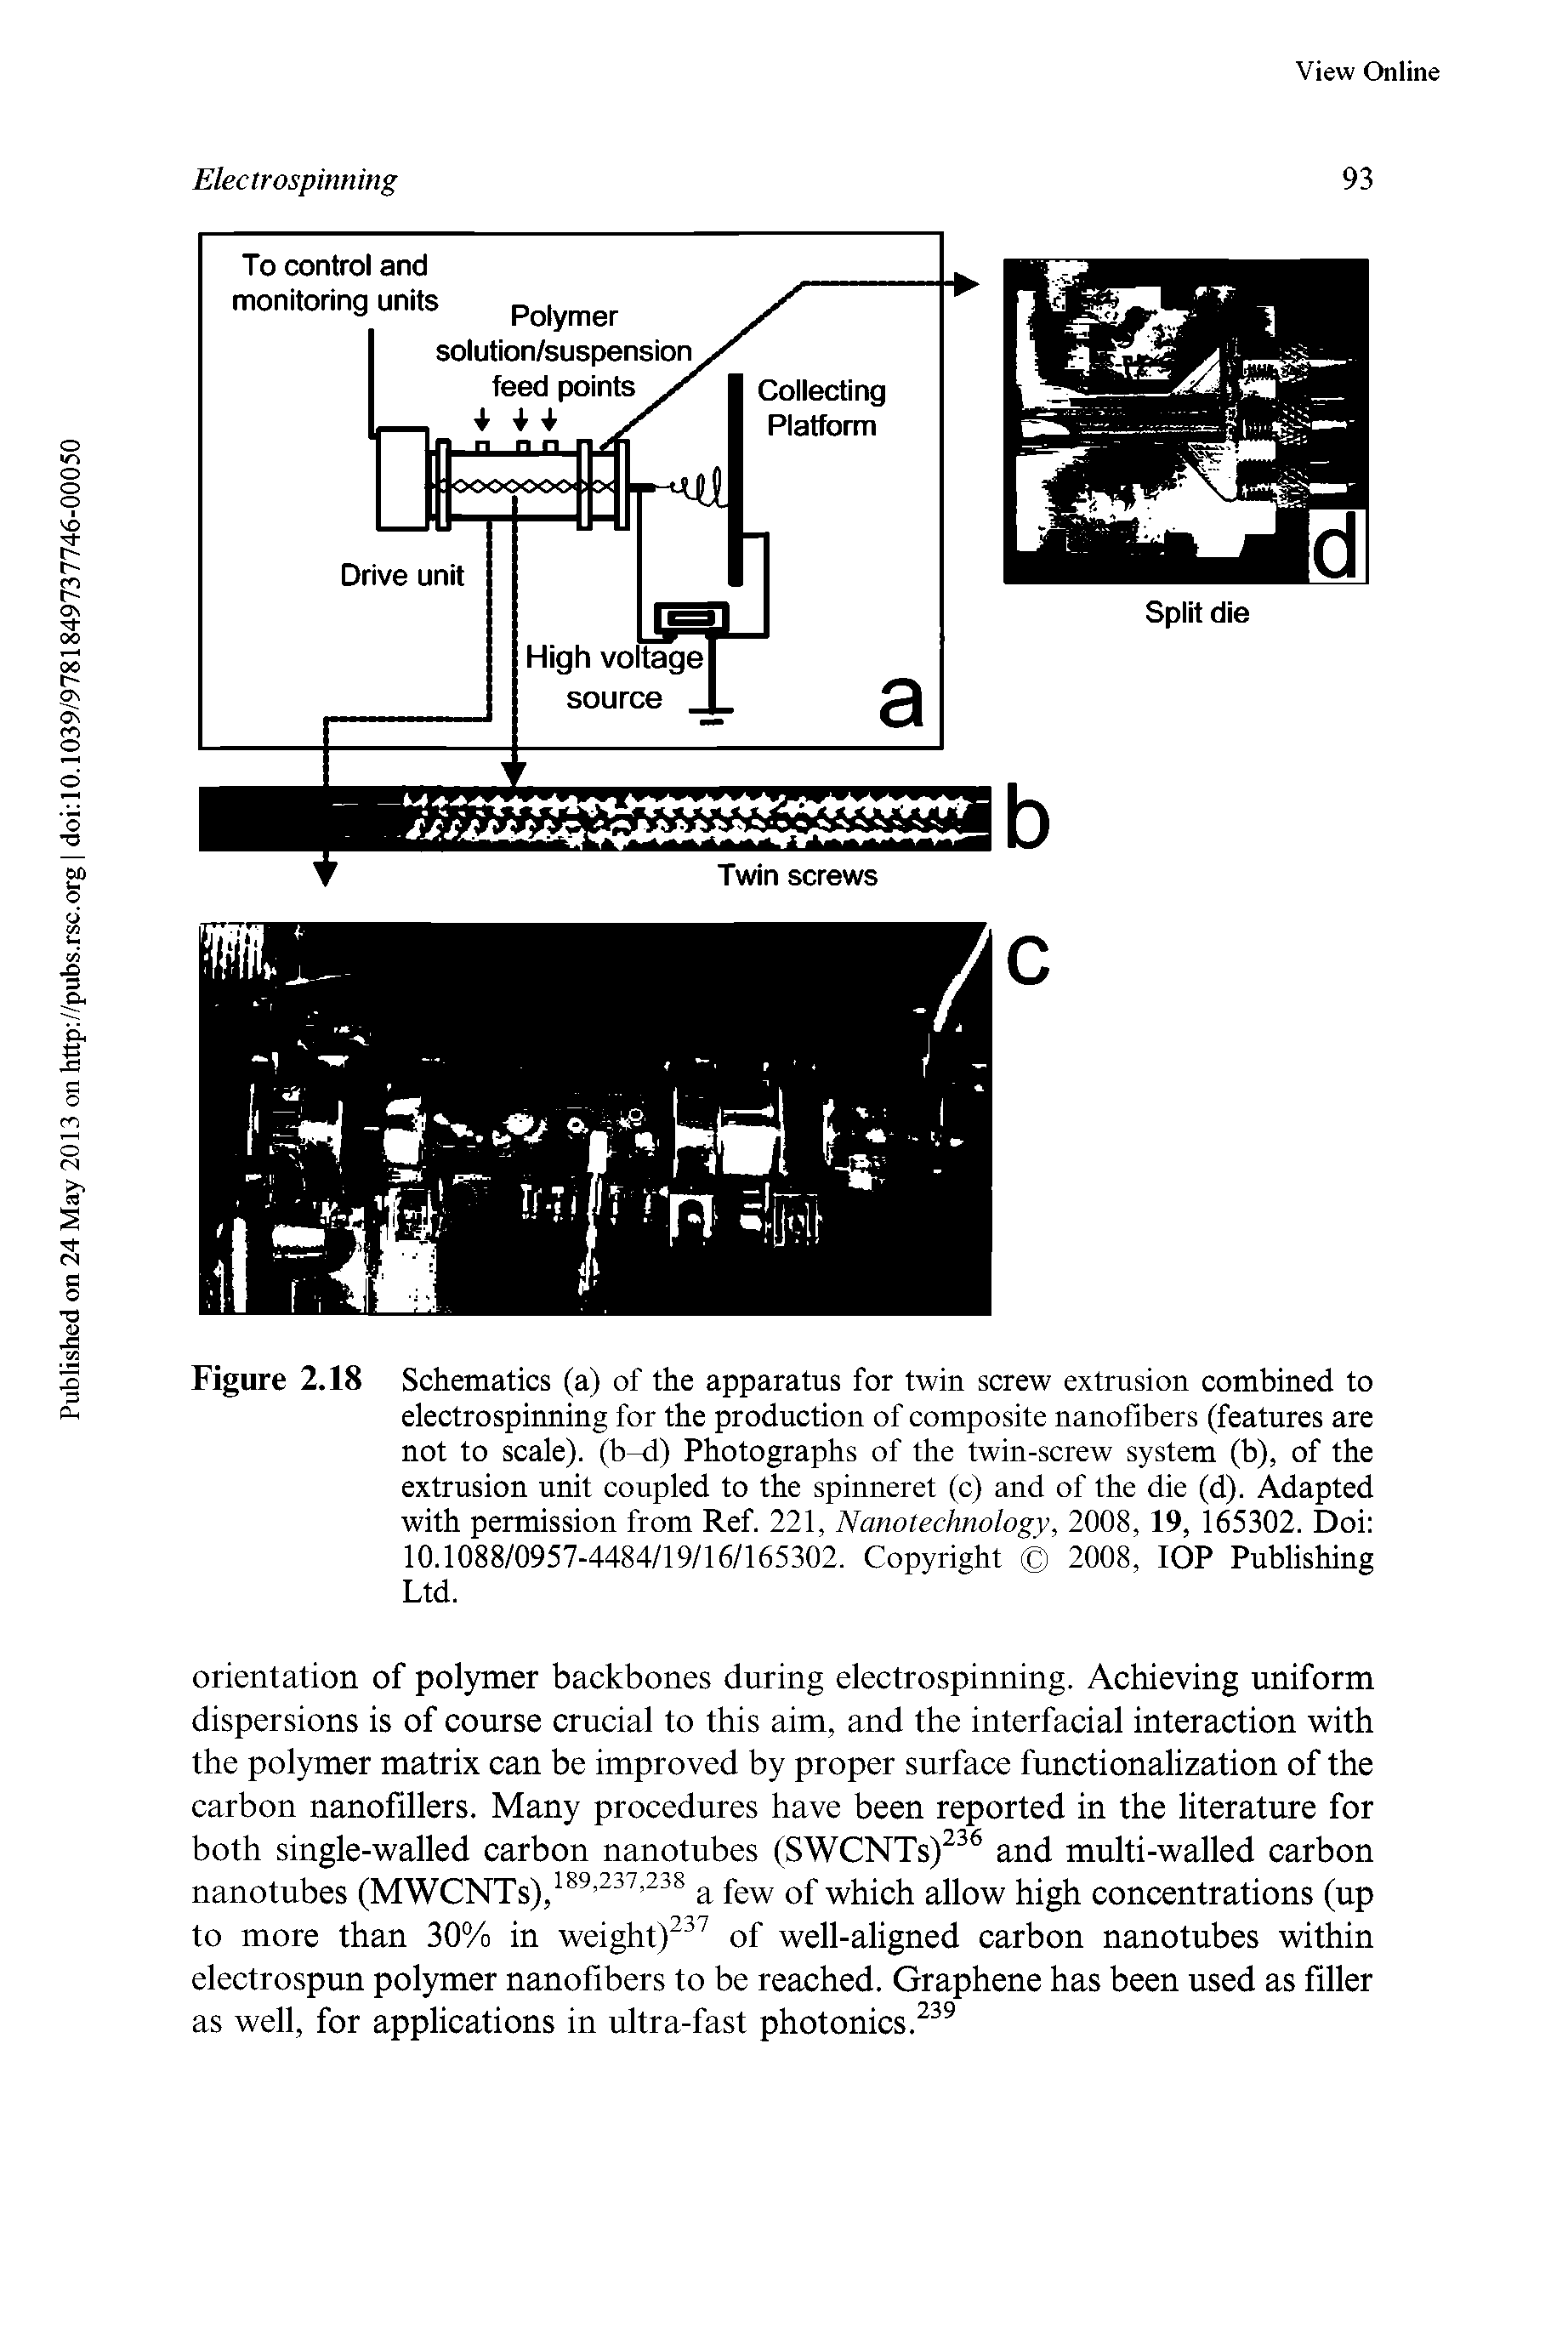 Figure 2.18 Schematics (a) of the apparatus for twin screw extrusion combined to electrospinning for the production of composite nanofibers (features are not to scale), (b-d) Photographs of the twin-screw system (b), of the extrusion unit coupled to the spinneret (c) and of the die (d). Adapted with permission from Ref. 221, Nanotechnology, 2008,19, 165302. Doi 10.1088/0957-4484/19/16/165302. Copyright 2008, lOP Publishing Ltd.